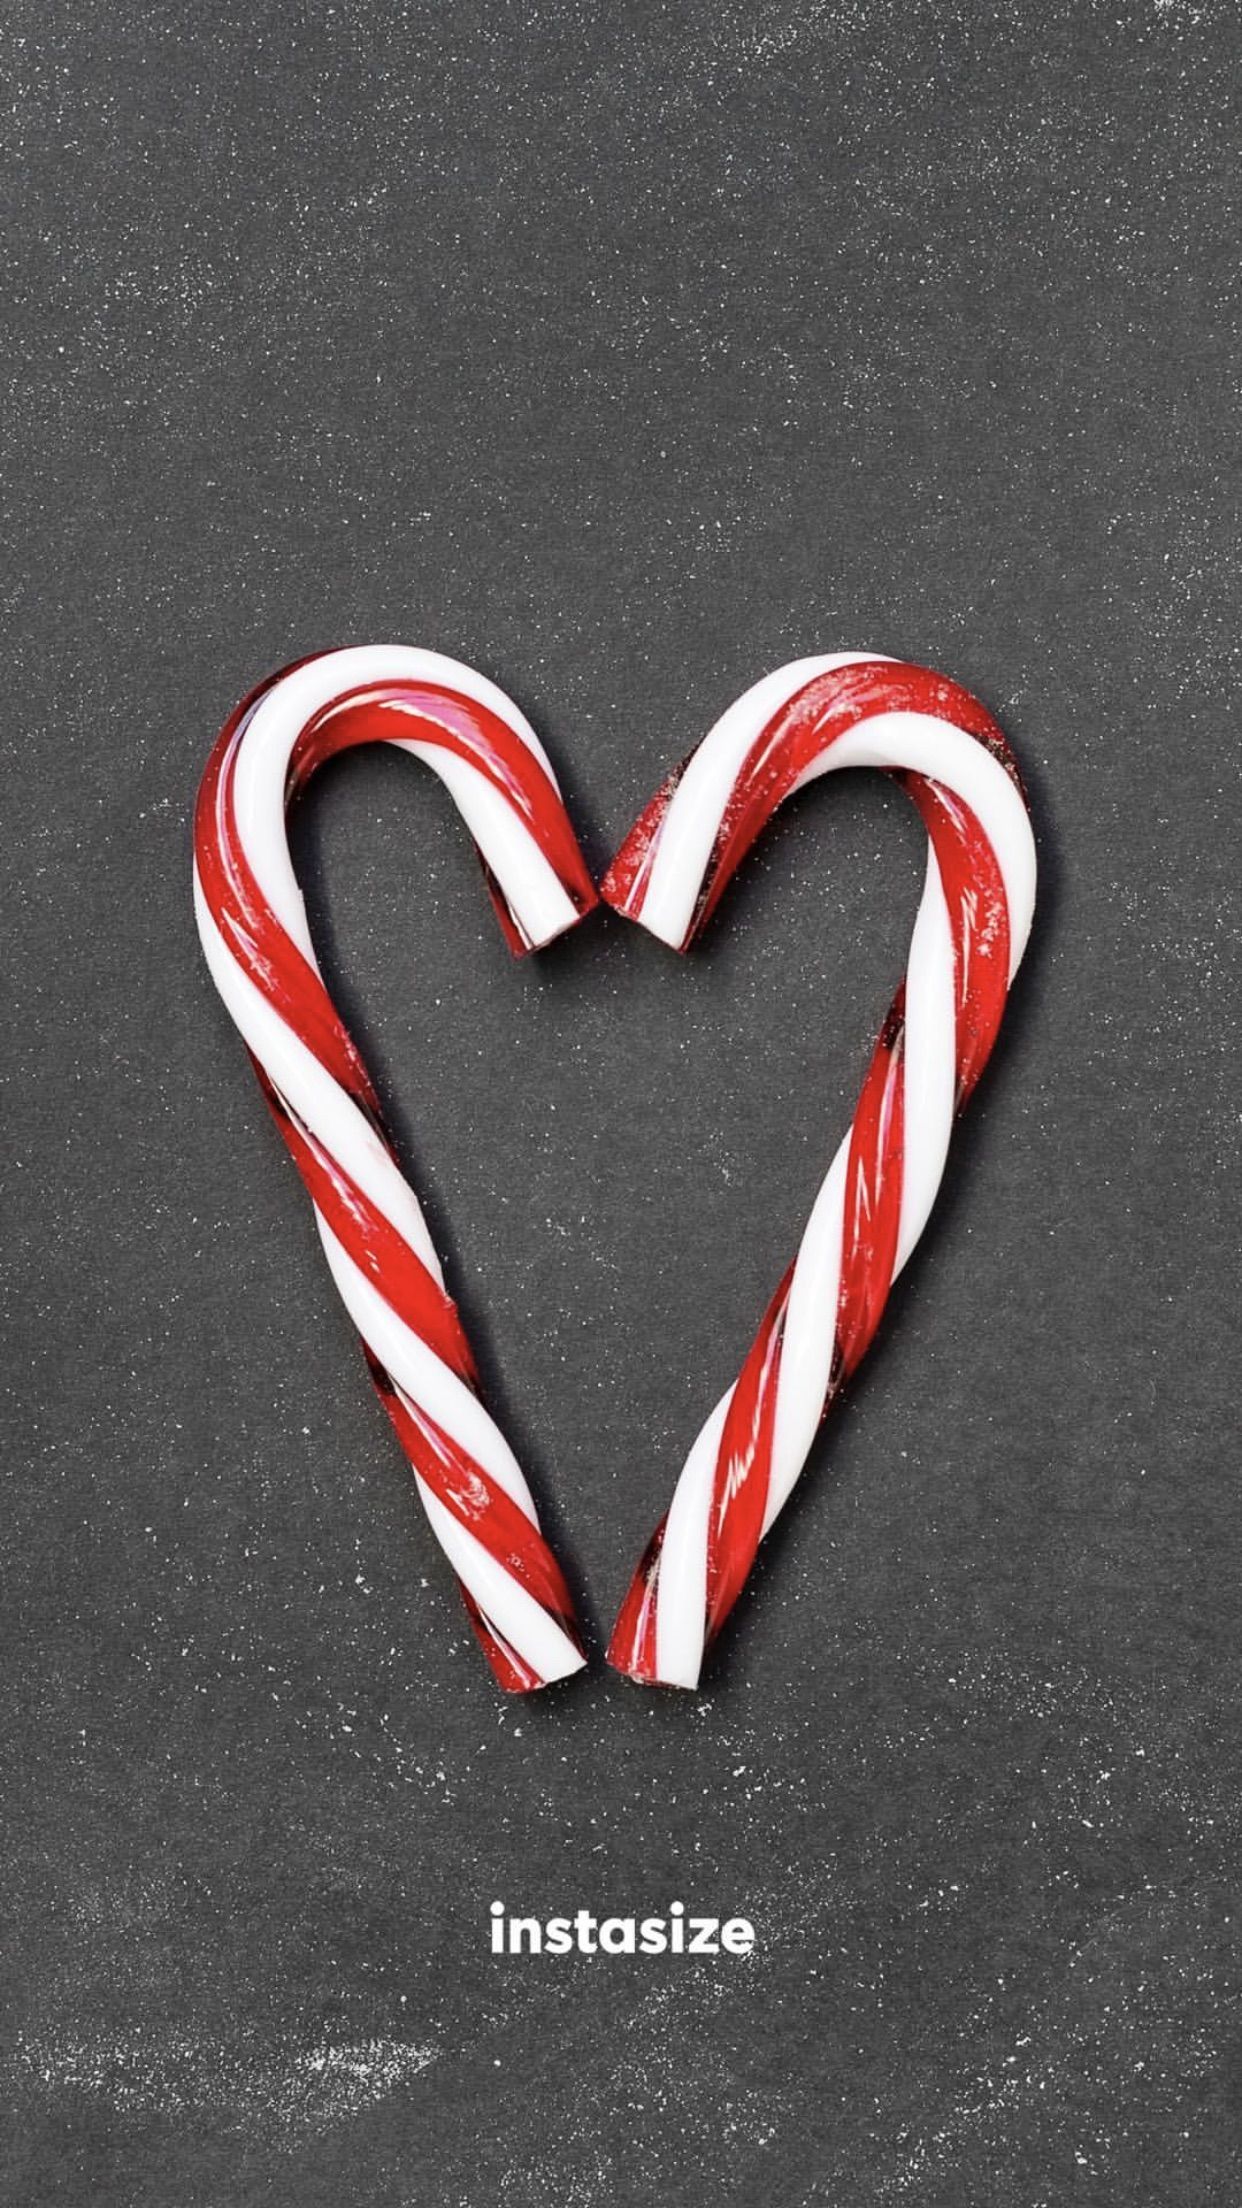 Candy Cane Hearts wallpaper background #Instasize #Wallpaper. Heart wallpaper, Phone background wallpaper, Christmas wallpaper